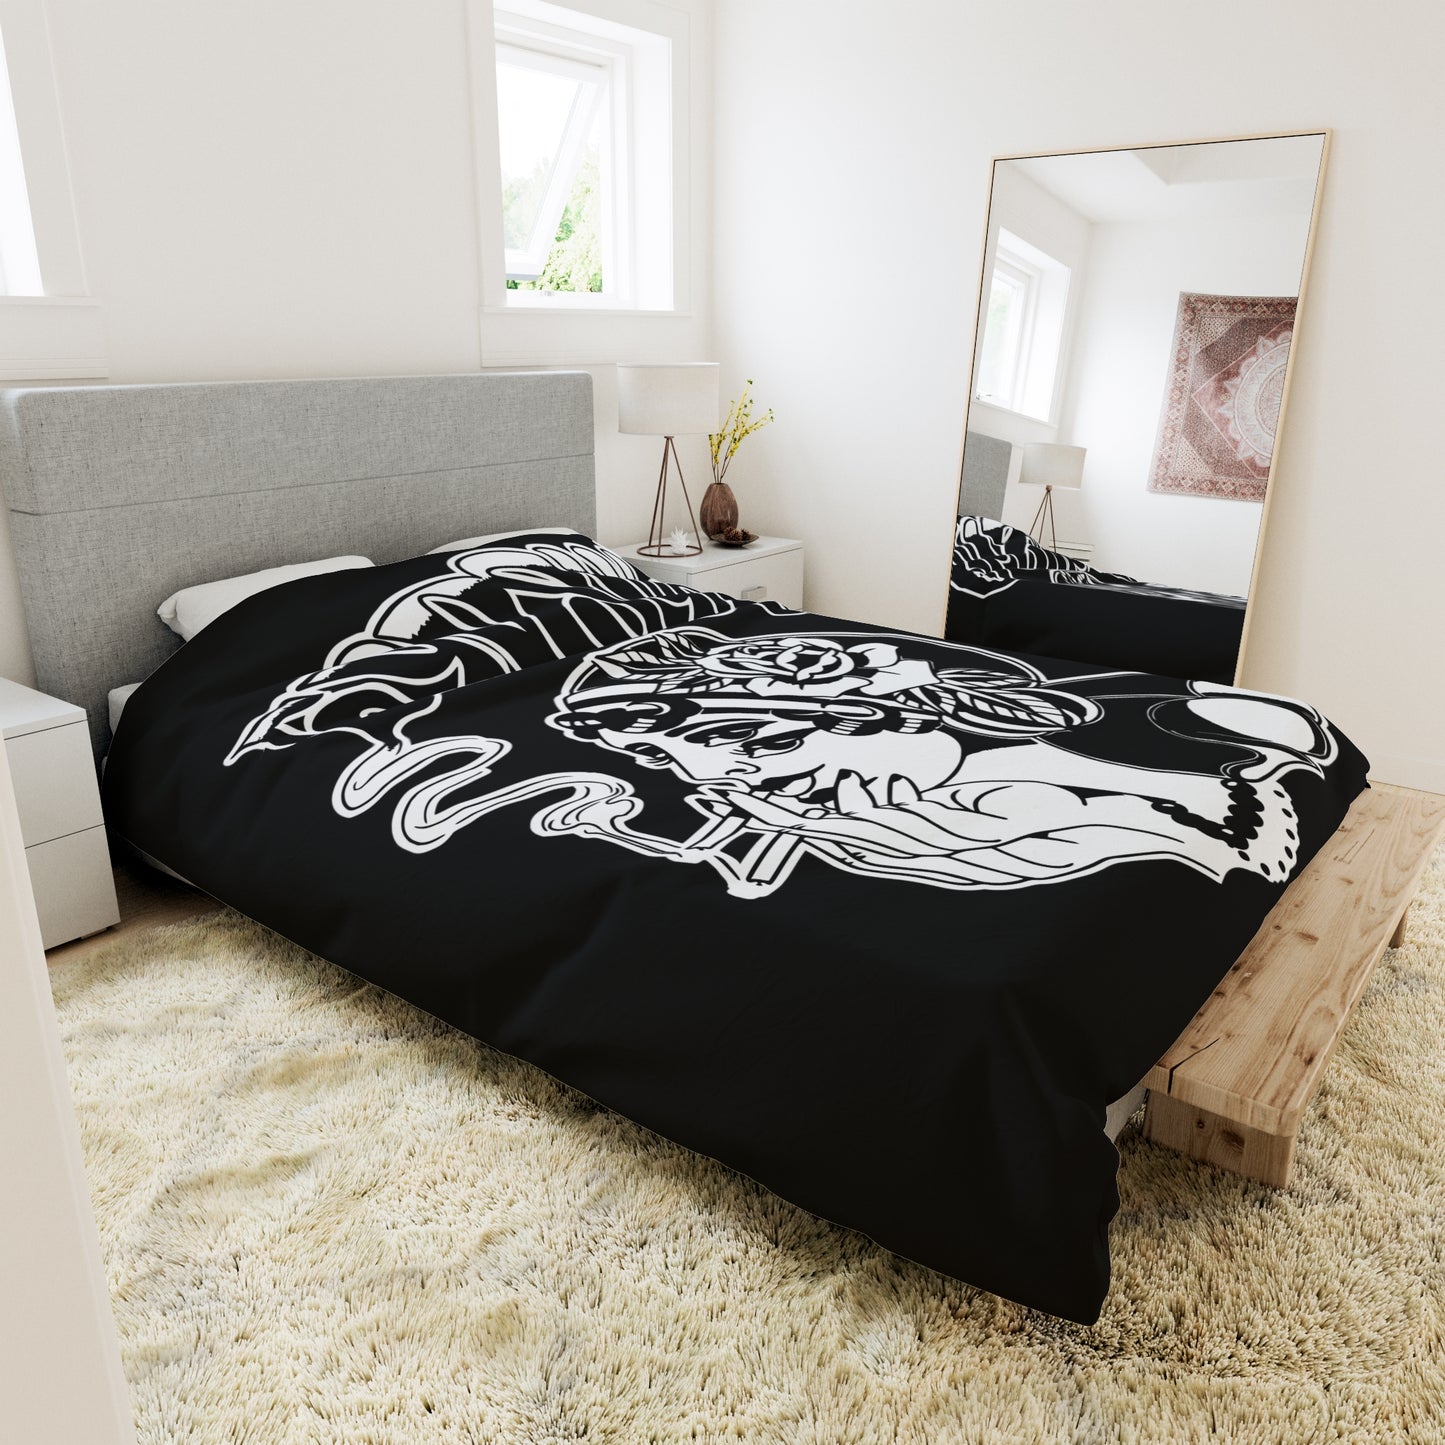 Duvet Cover | Gypsy's Double Gypsy Lady (by @ohbhave)